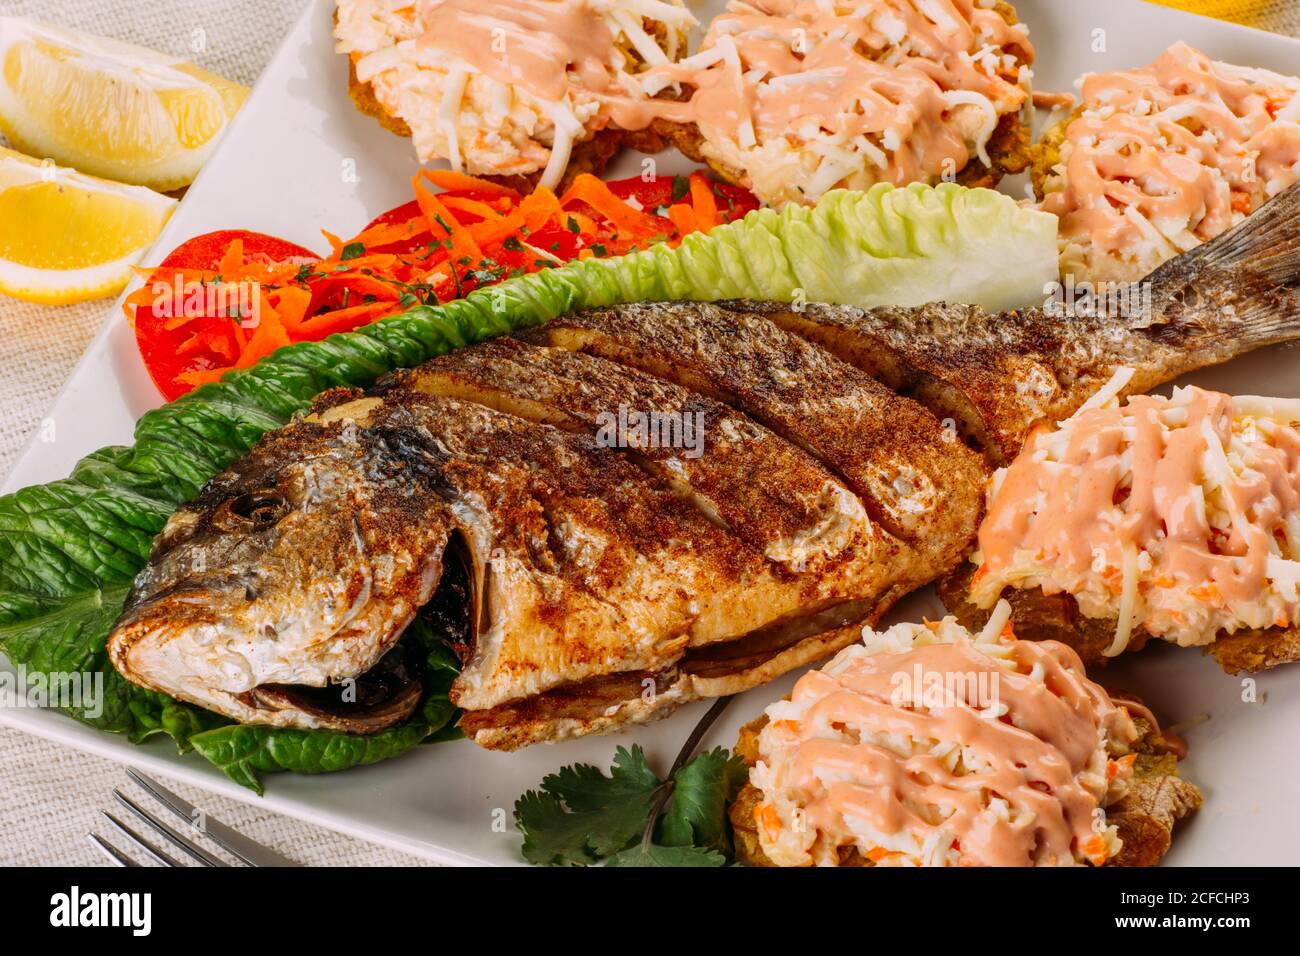 Top view of fried fish, salad and fried plantain Stock Photo